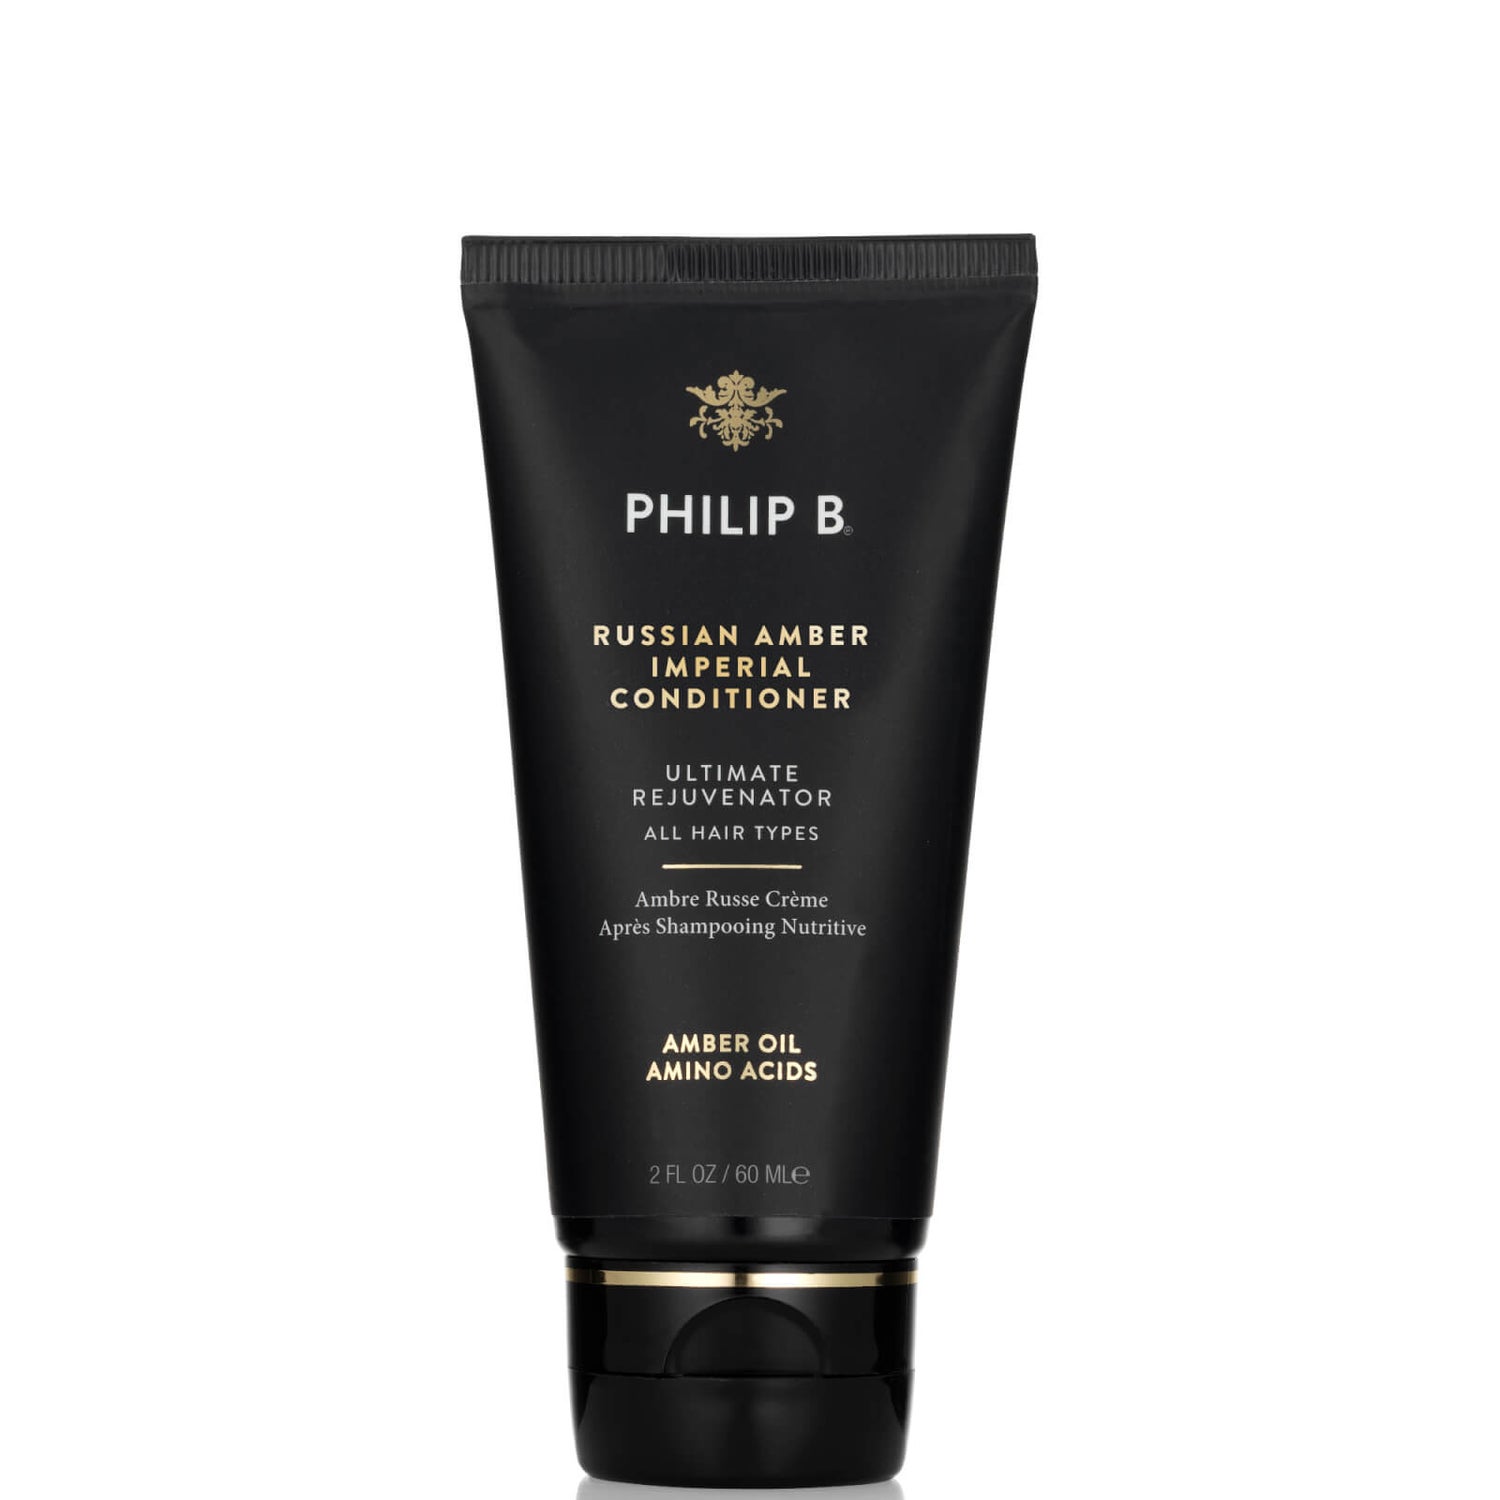 Philip B Russian Amber Imperial Conditioning Crème (60 ml)